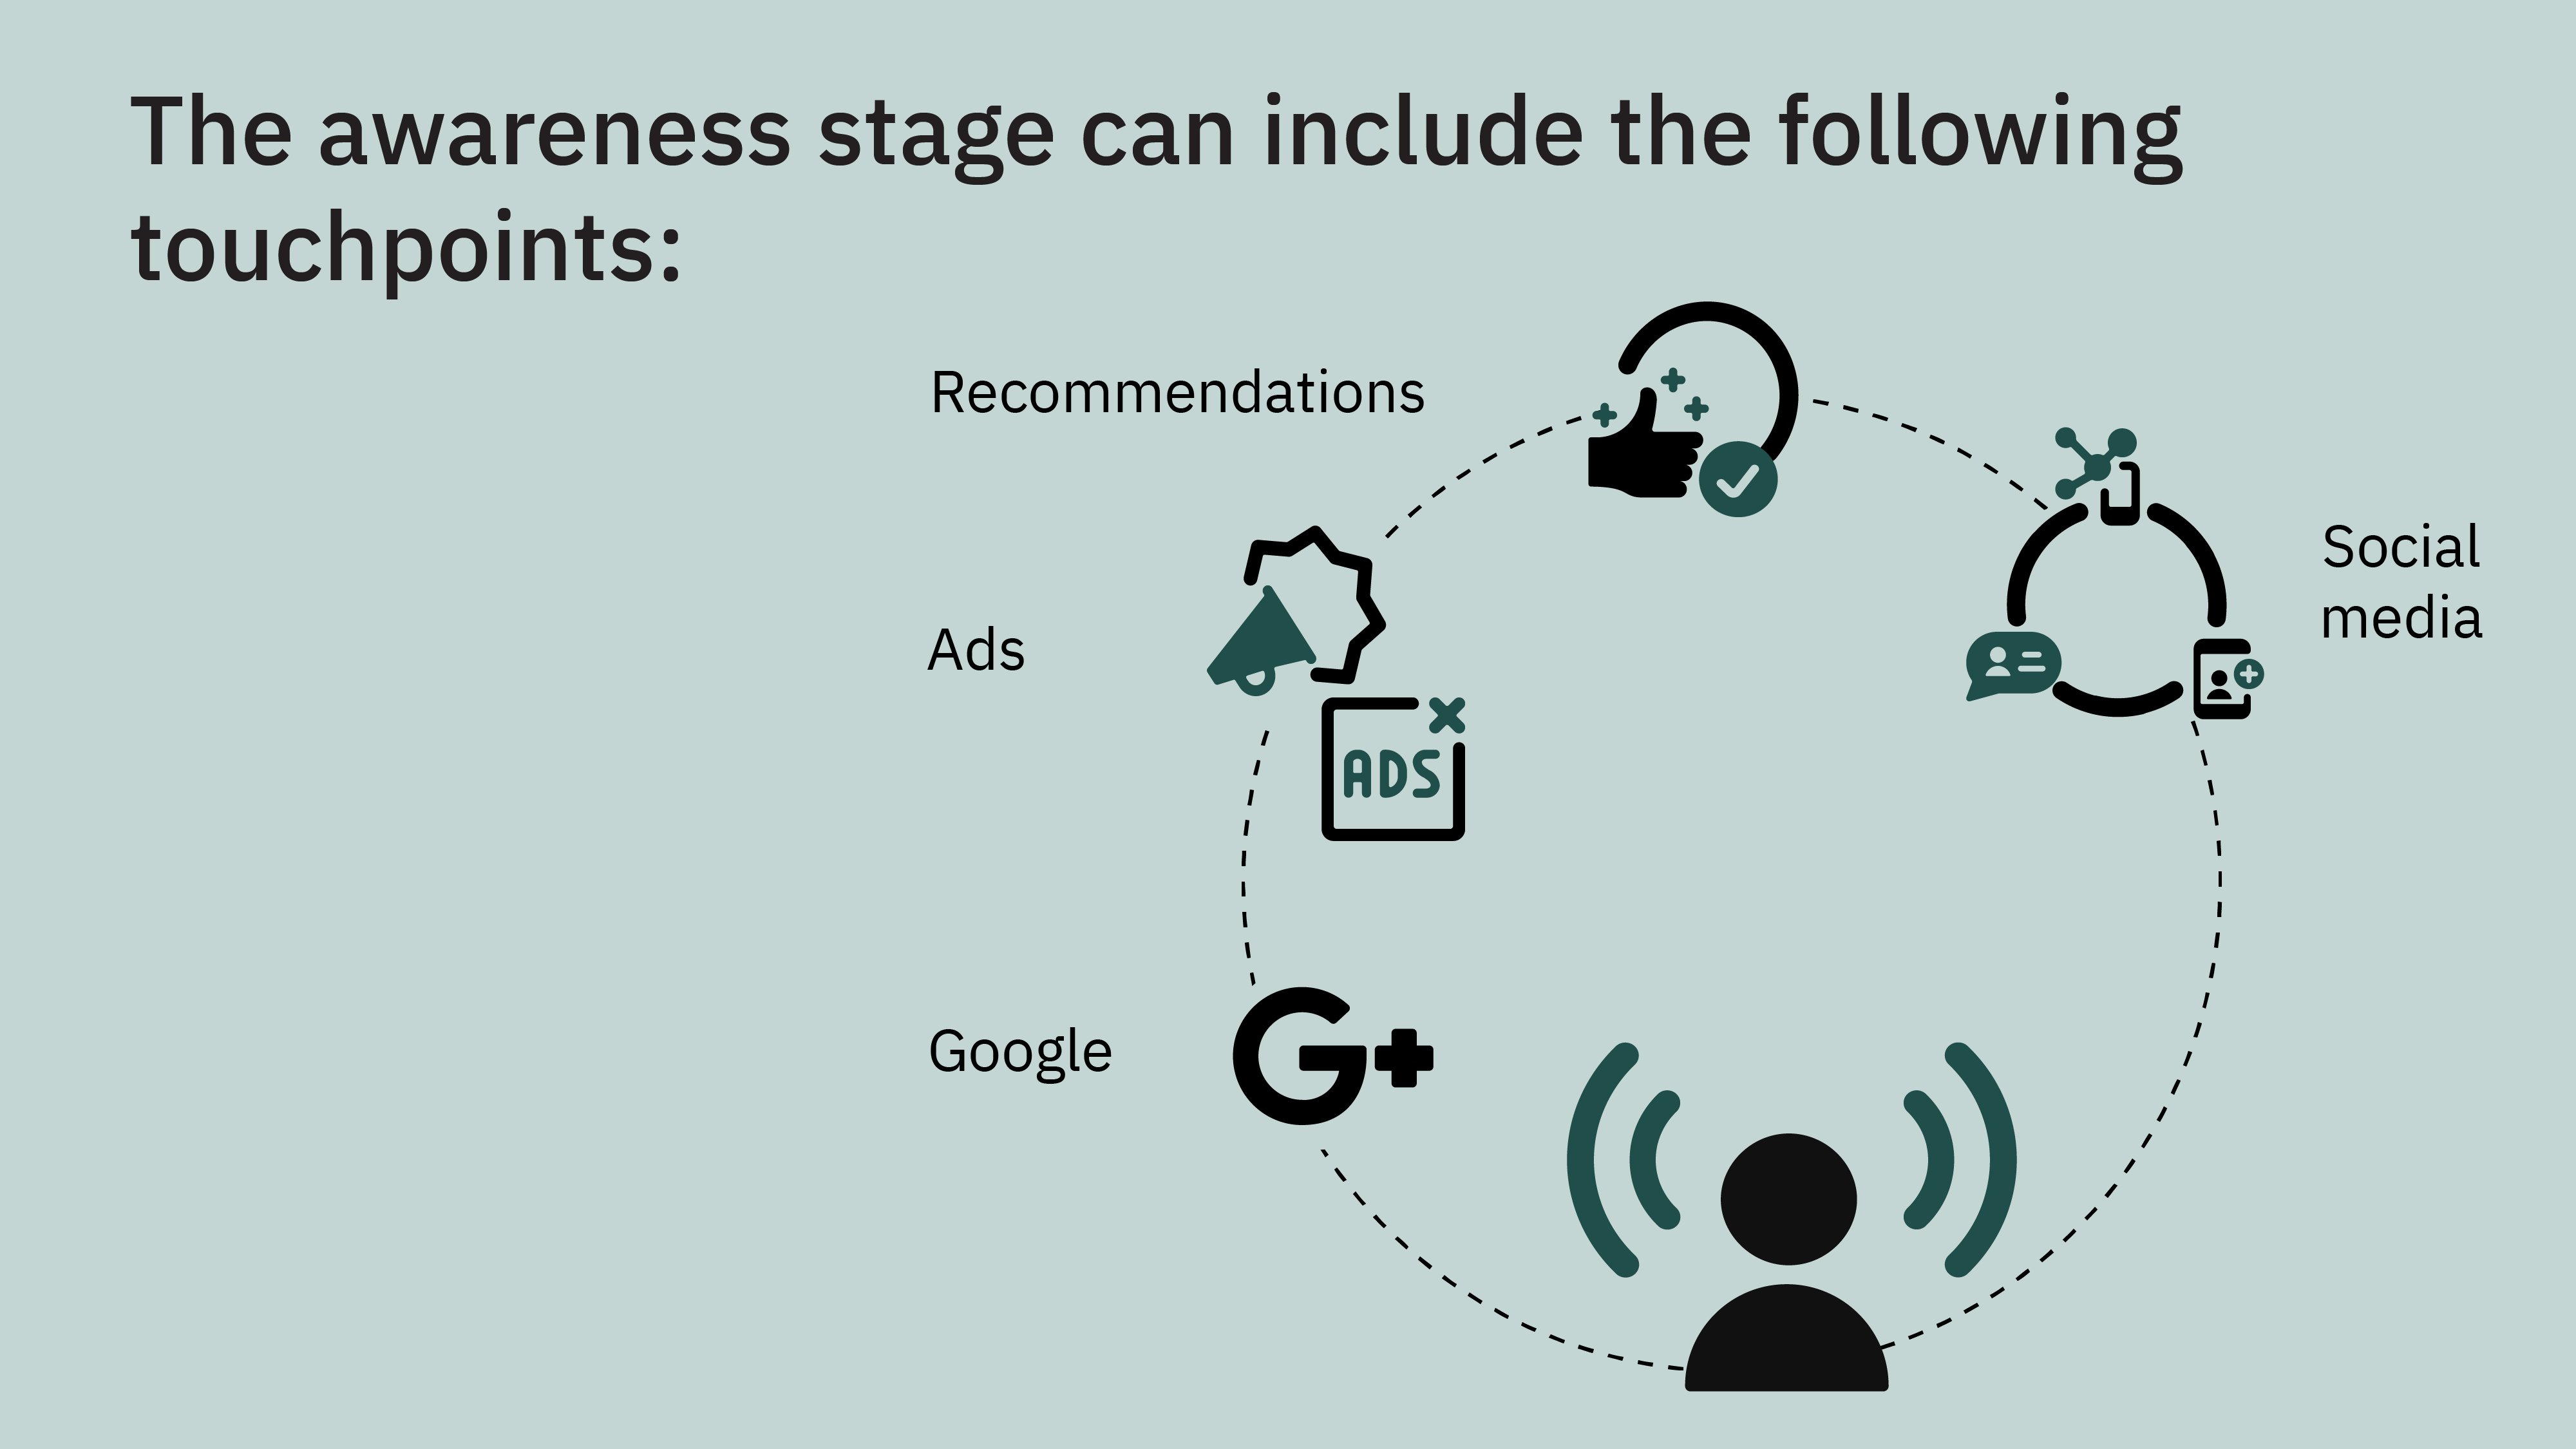 Customer touchpoints in the awareness stage.